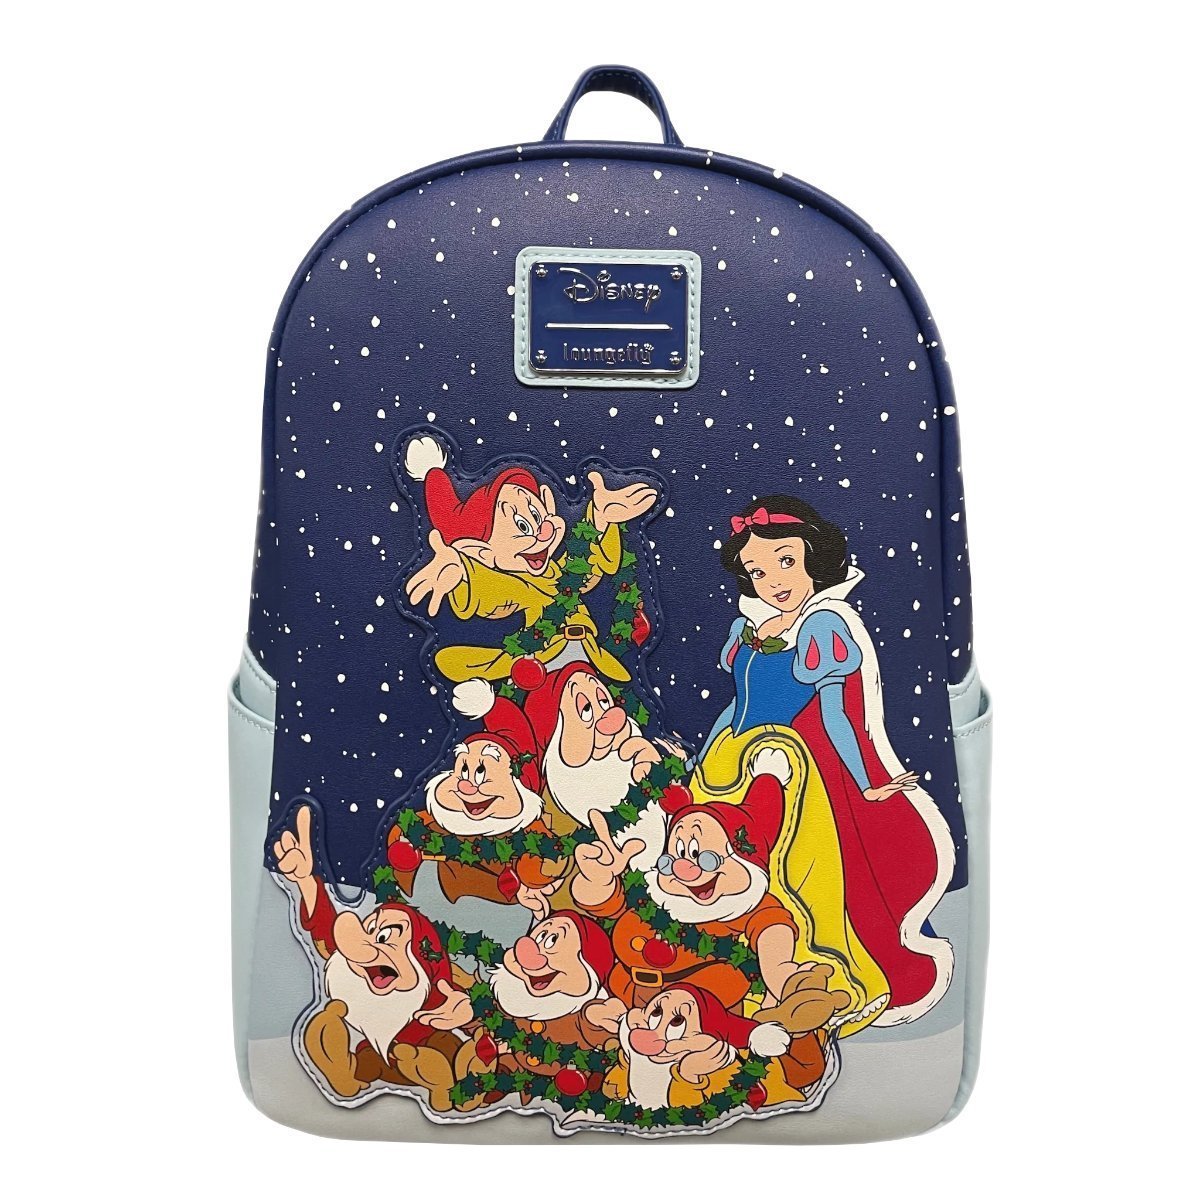 Snow White and the Seven Dwarfs Holiday